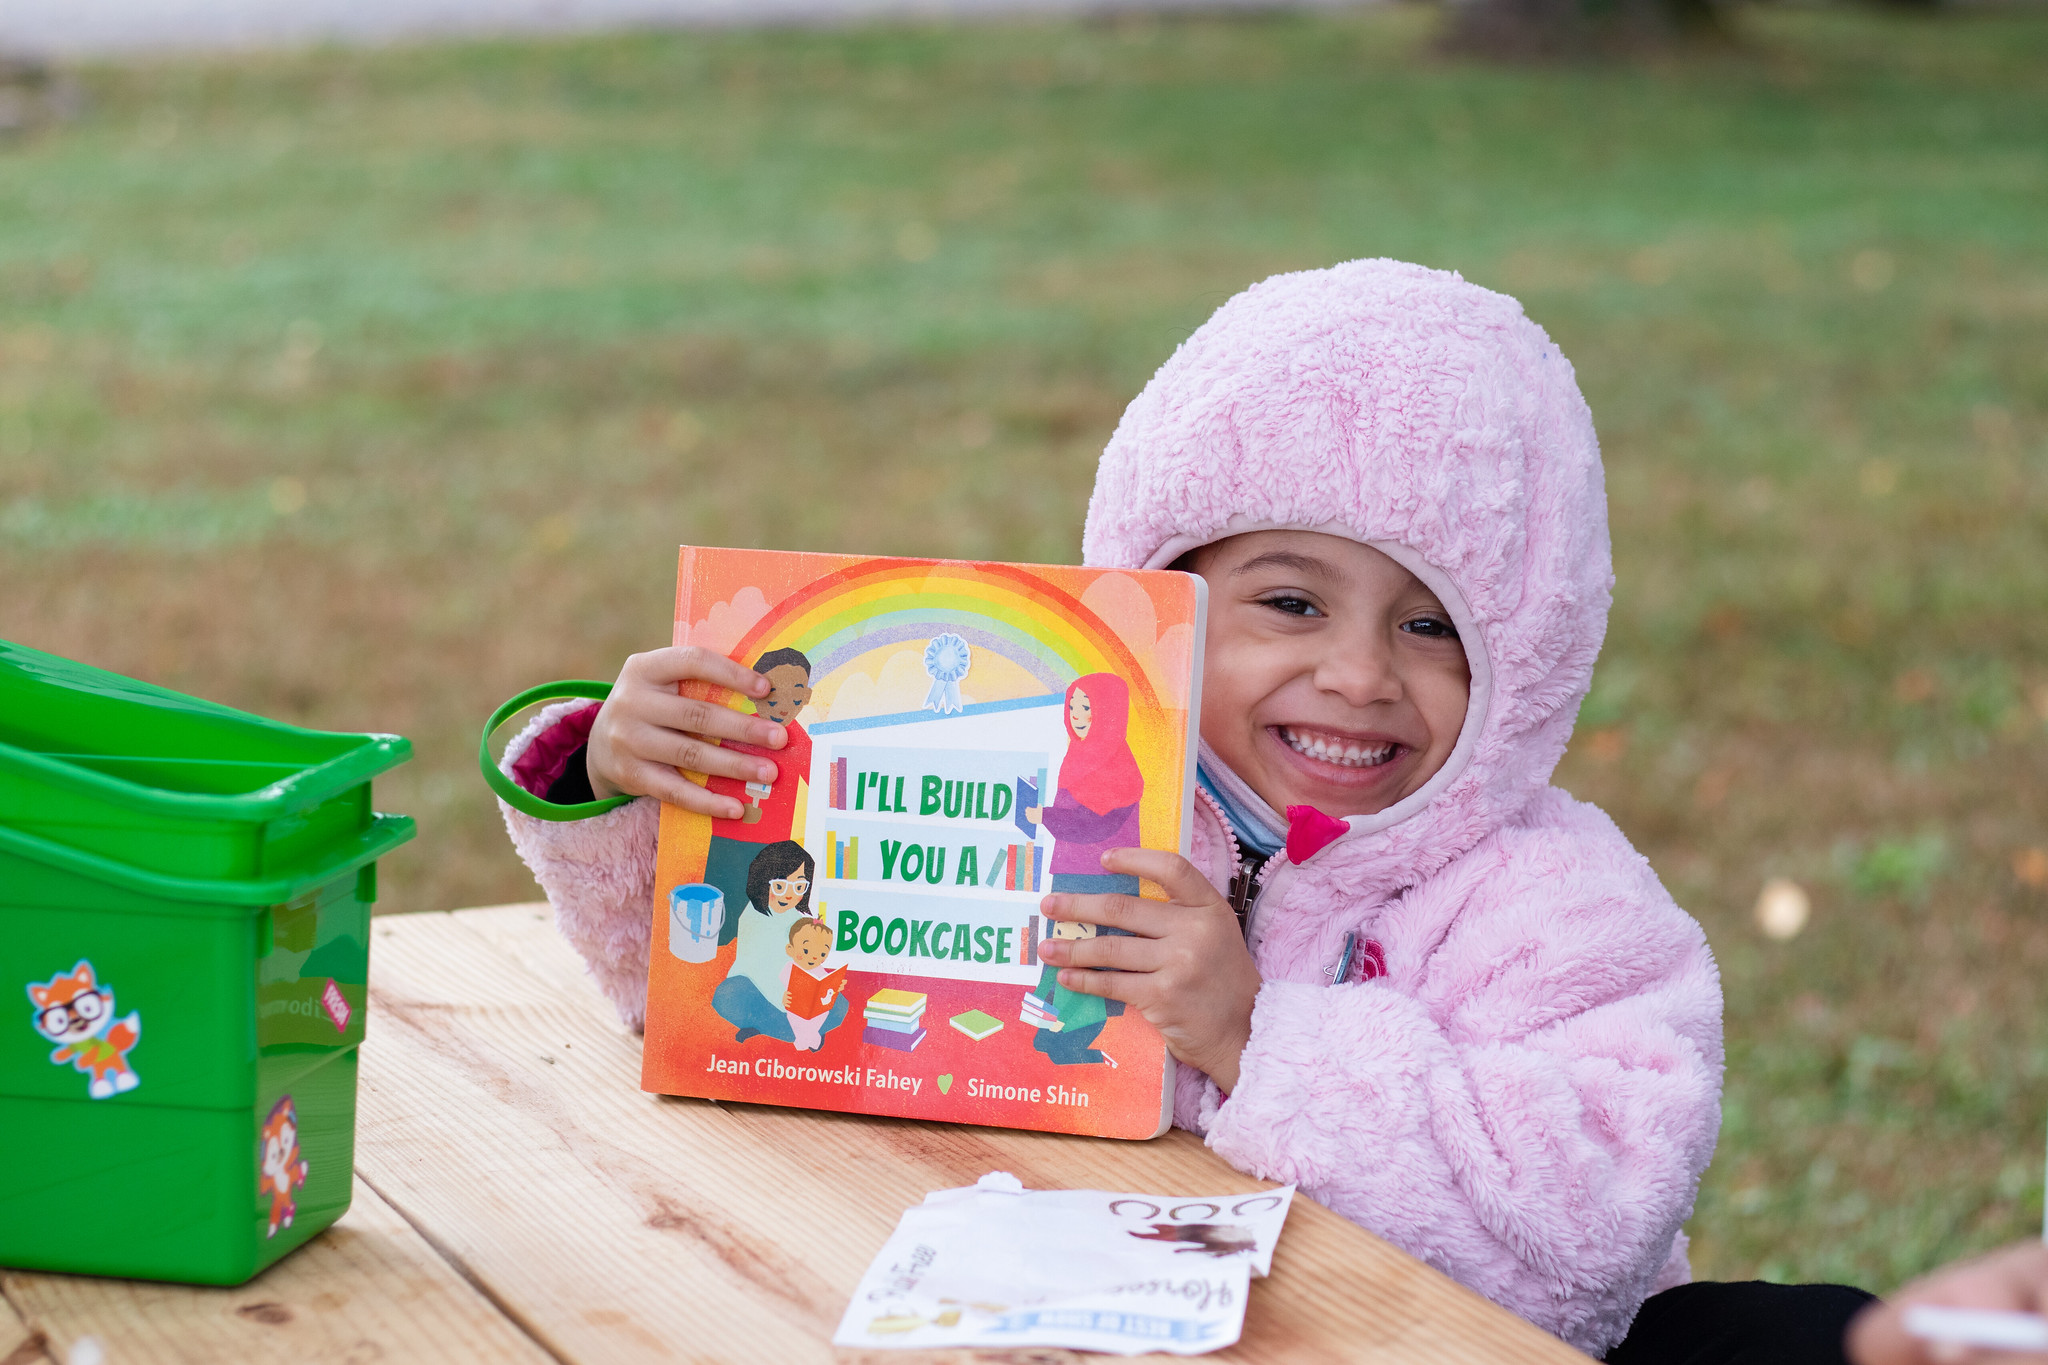 A young girl in a fuzzy pink jacket with the hood up, sitting at a picnic table, holding a book.